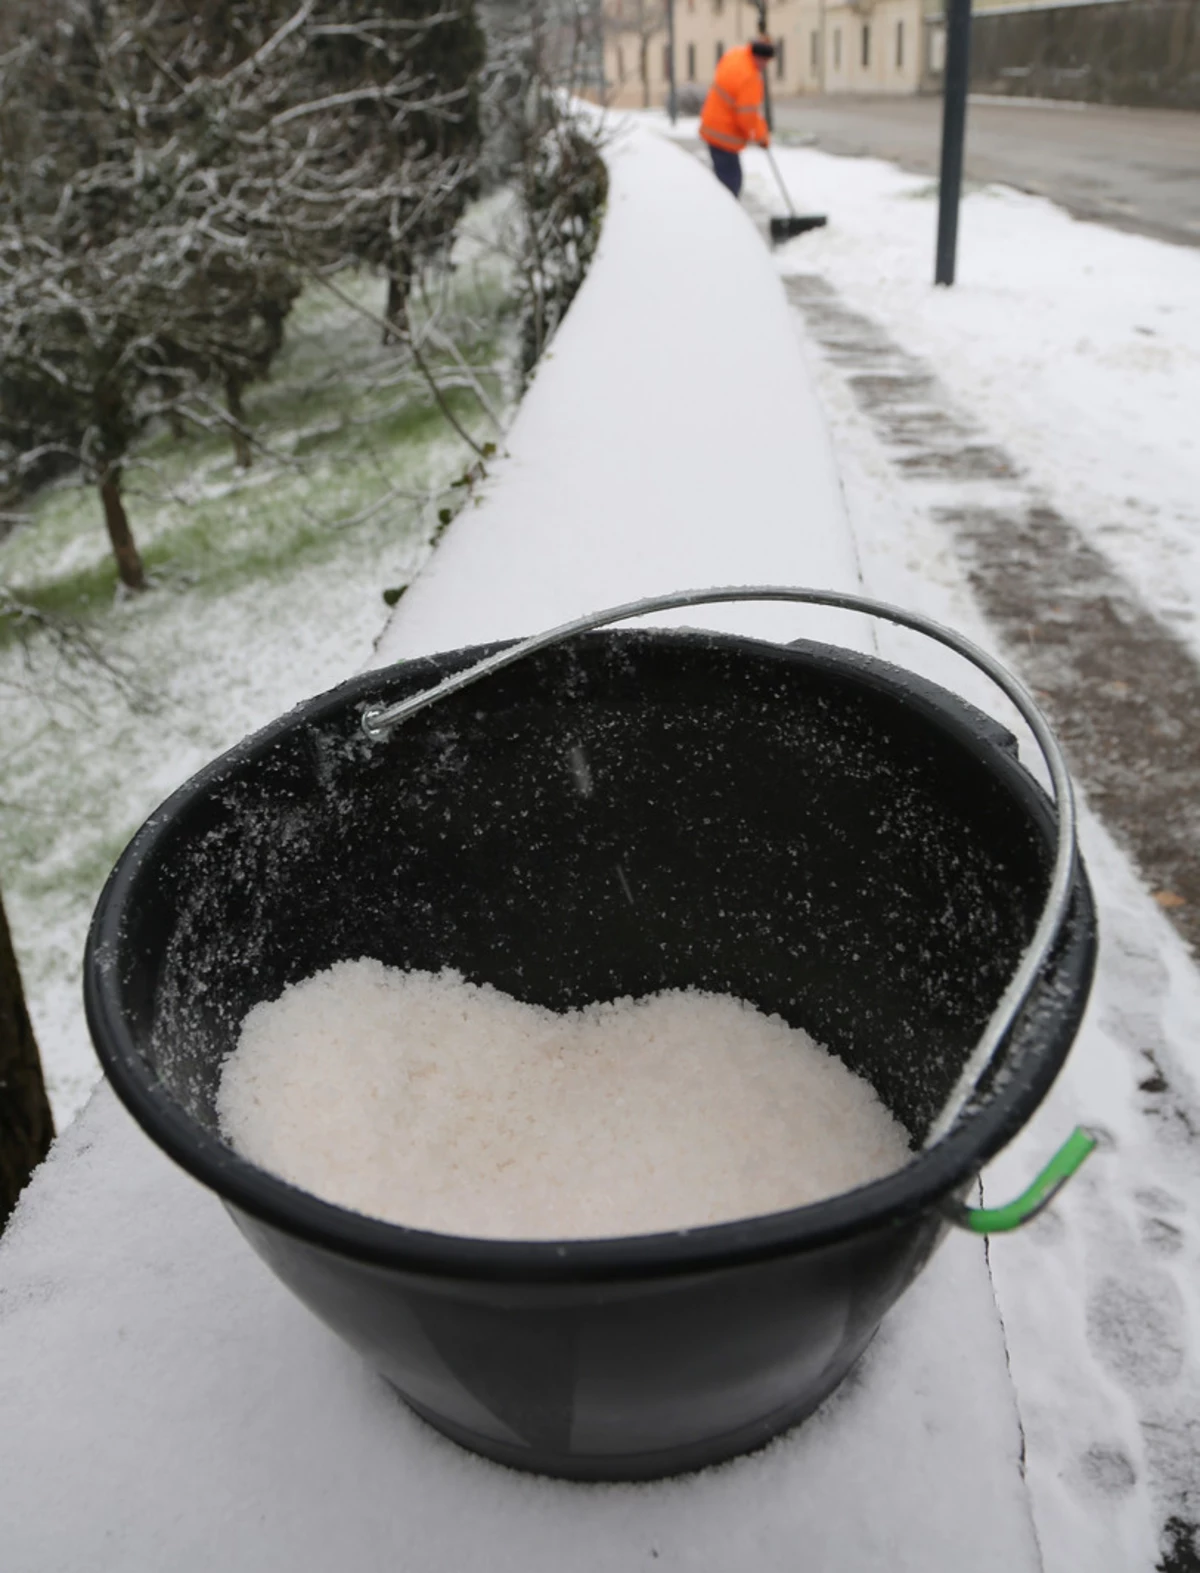 Minnesota Pollution Control Says Don't Over Salt This Winter